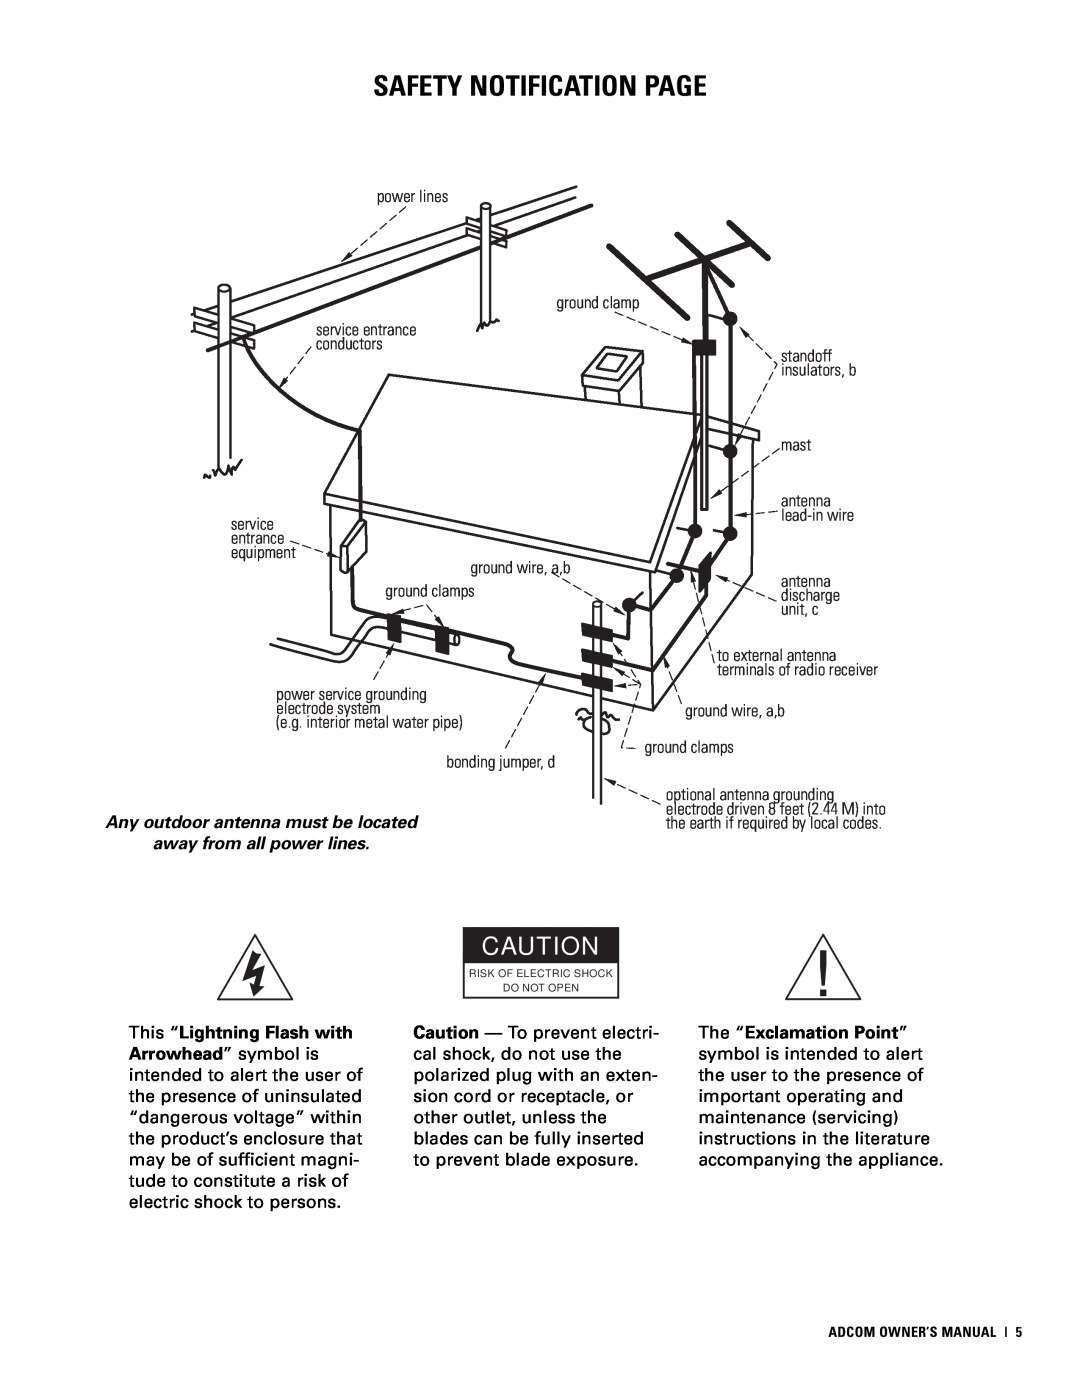 Adcom GTP-830 owner manual Safety Notification Page, Any outdoor antenna must be located, away from all power lines 